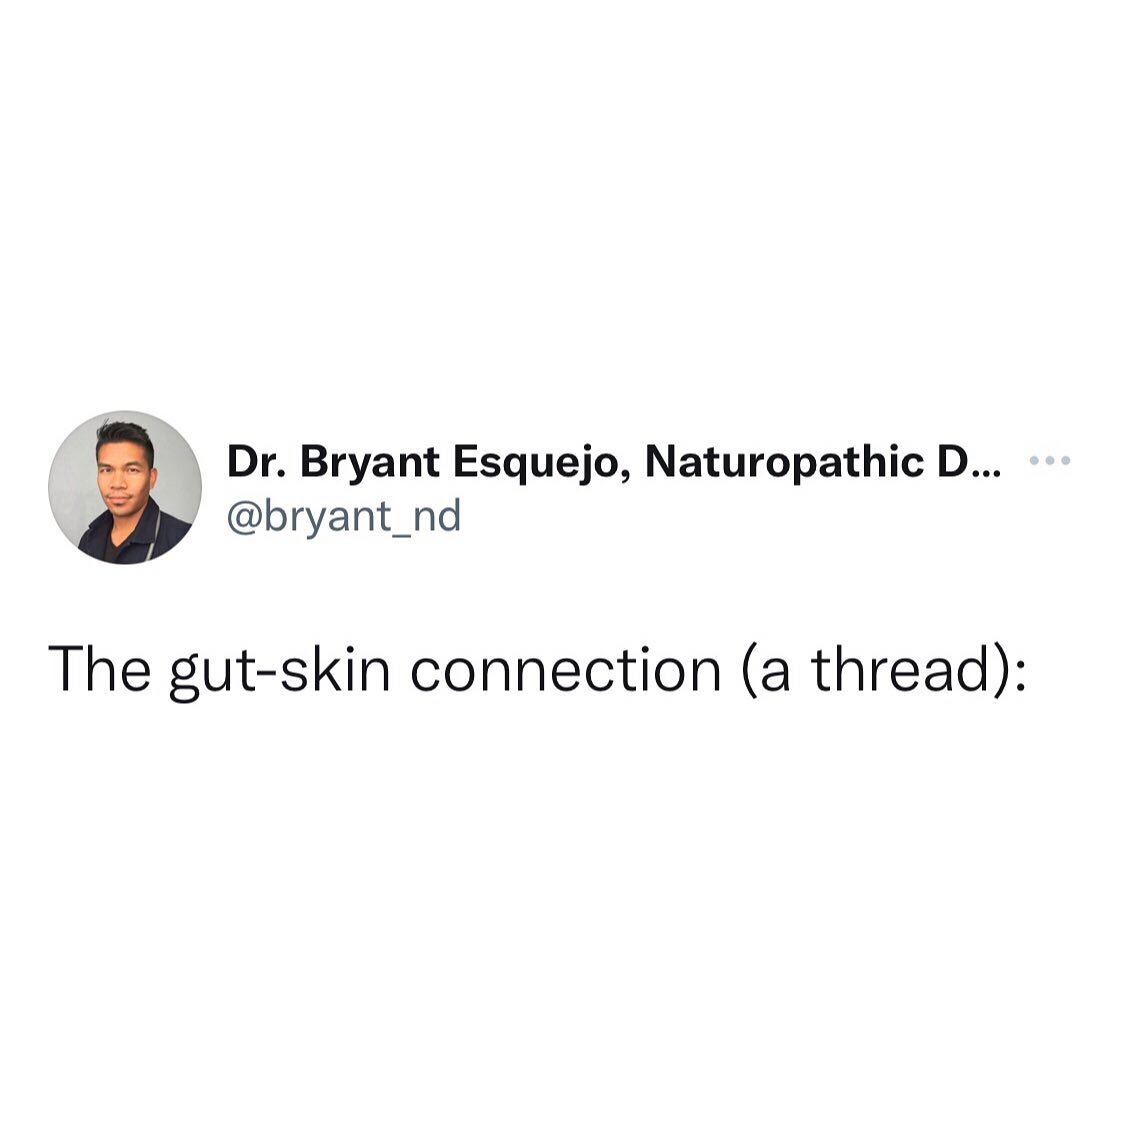 IYKYK
➡️The skin is a reflection of internal health and wellness. Chronic skin issues are the body&rsquo;s way of telling you something is out of balance.
➡️For chronic skin issues, work with a provider who can identify possible internal imbalance fo